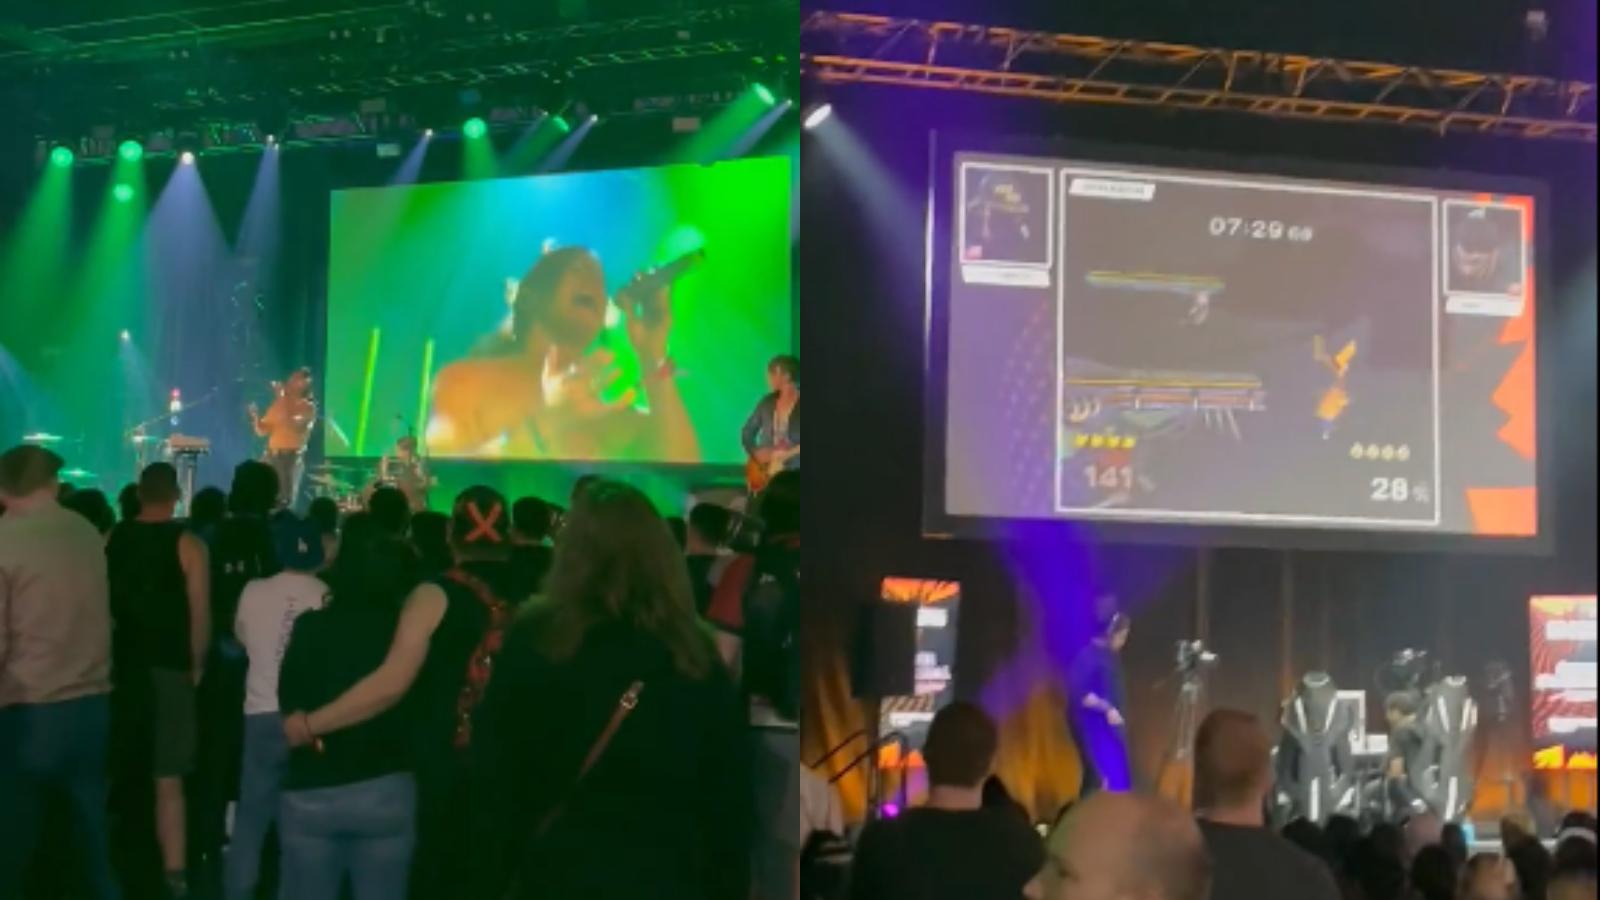 concert at dreamhack side-by-side with smash melee